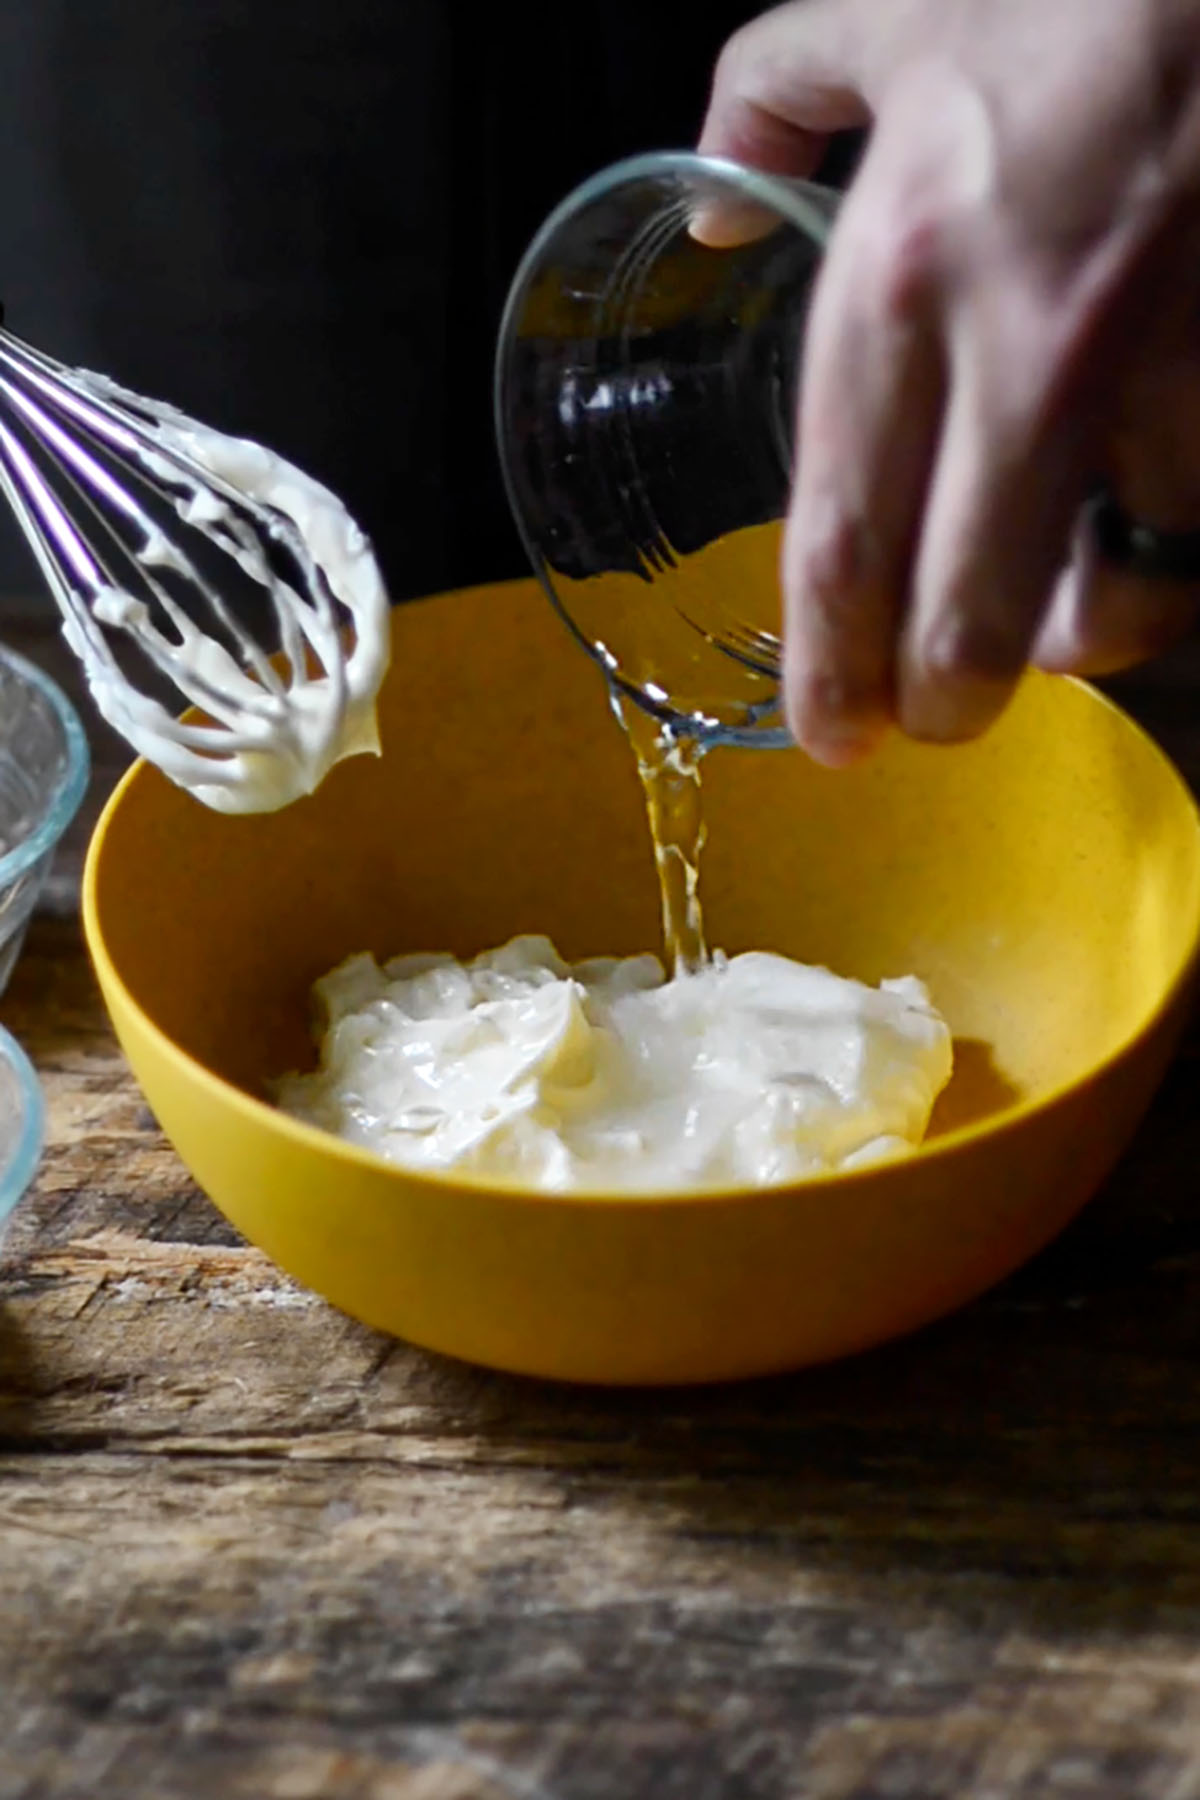 Vinegar being poured into a mixing bowl with mayonnaise.